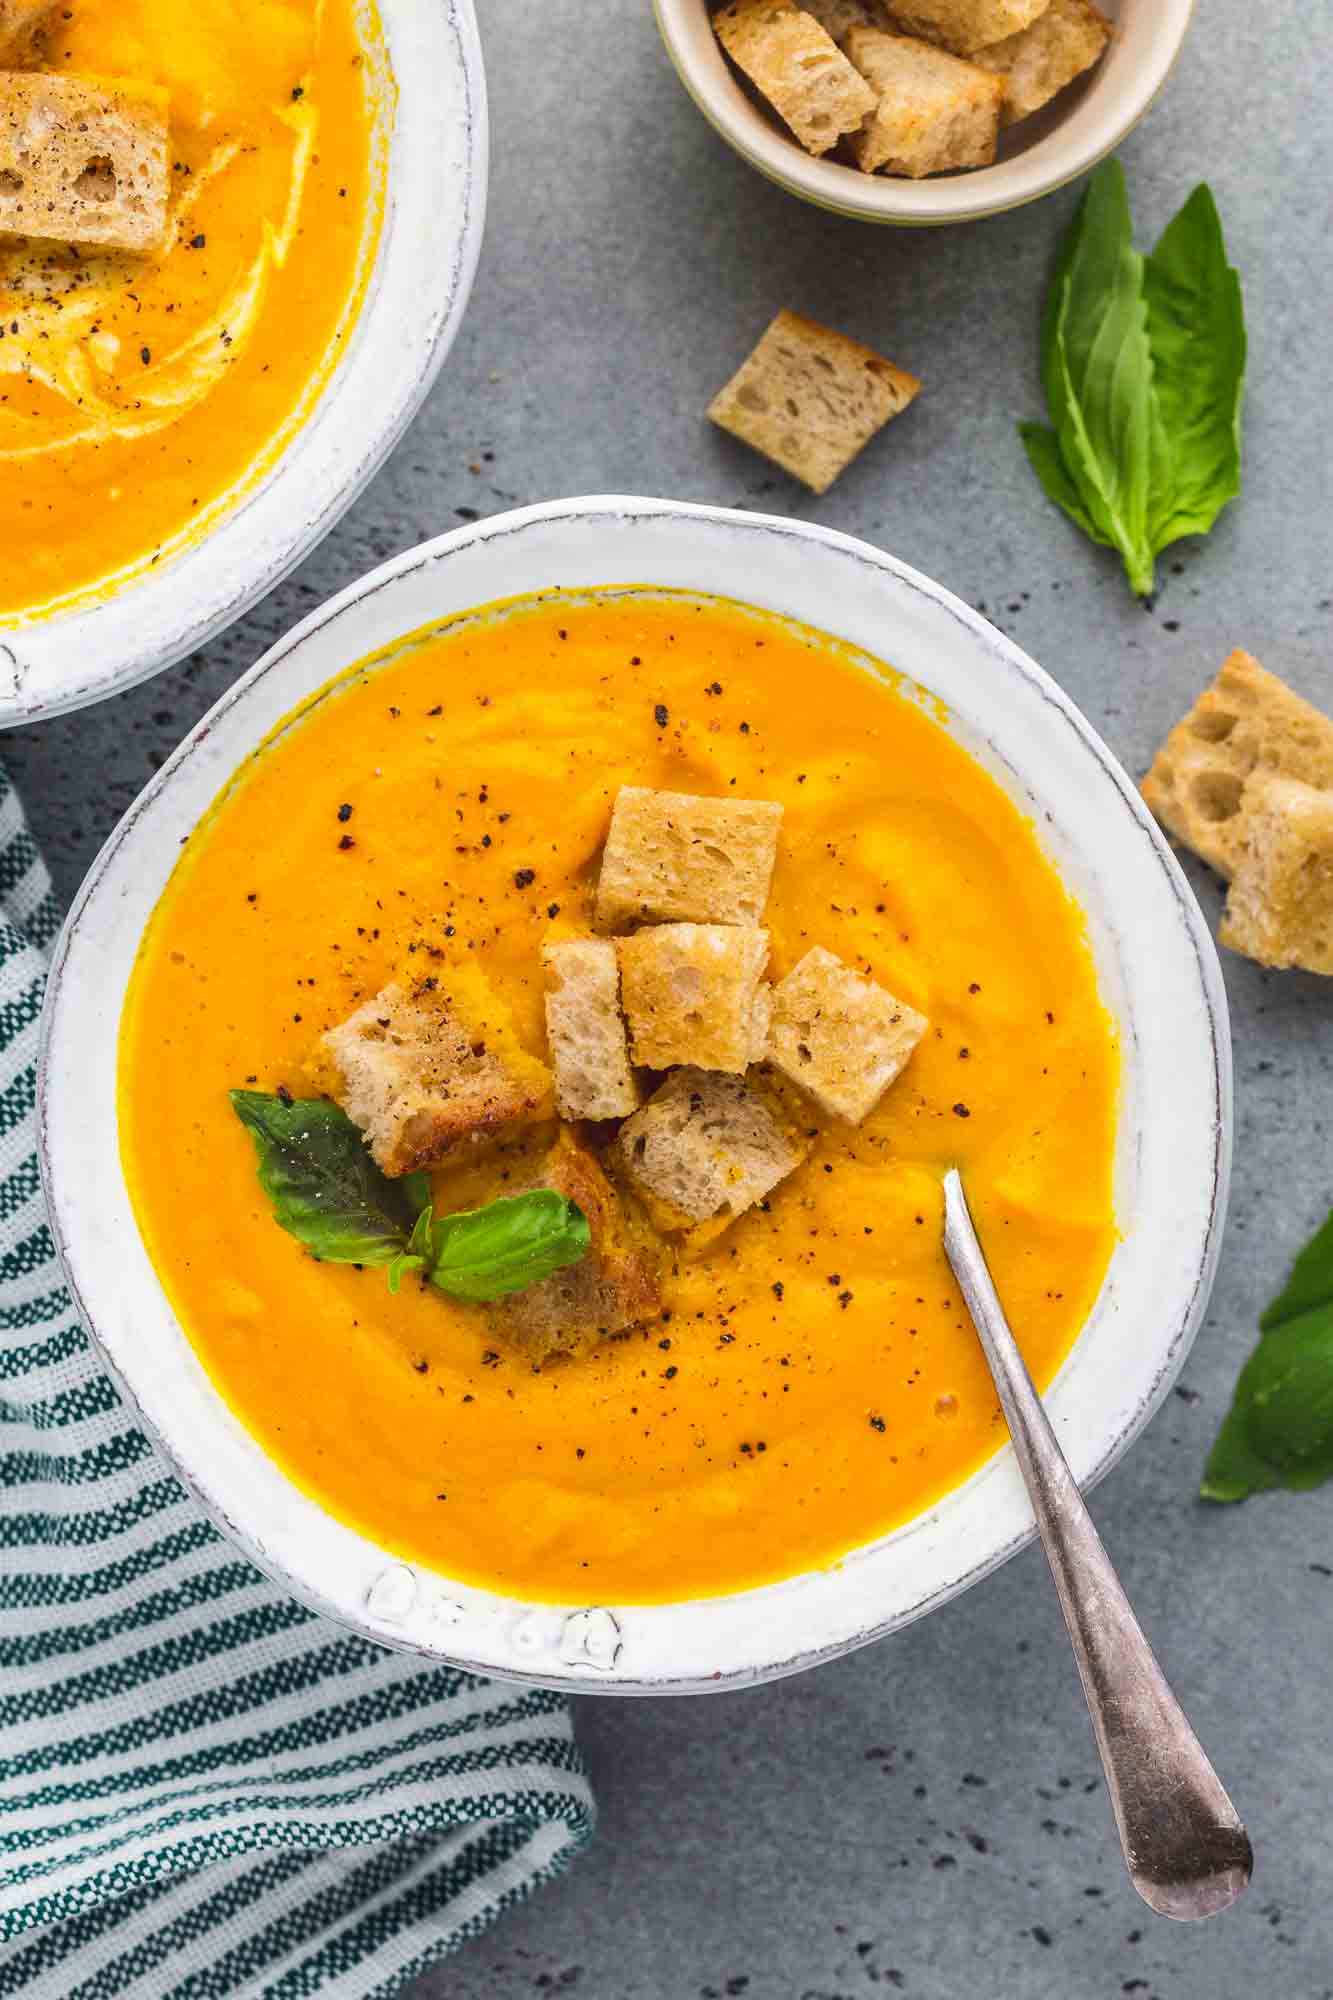 Overhead shot of 2 bowls of carrot soup with croutons